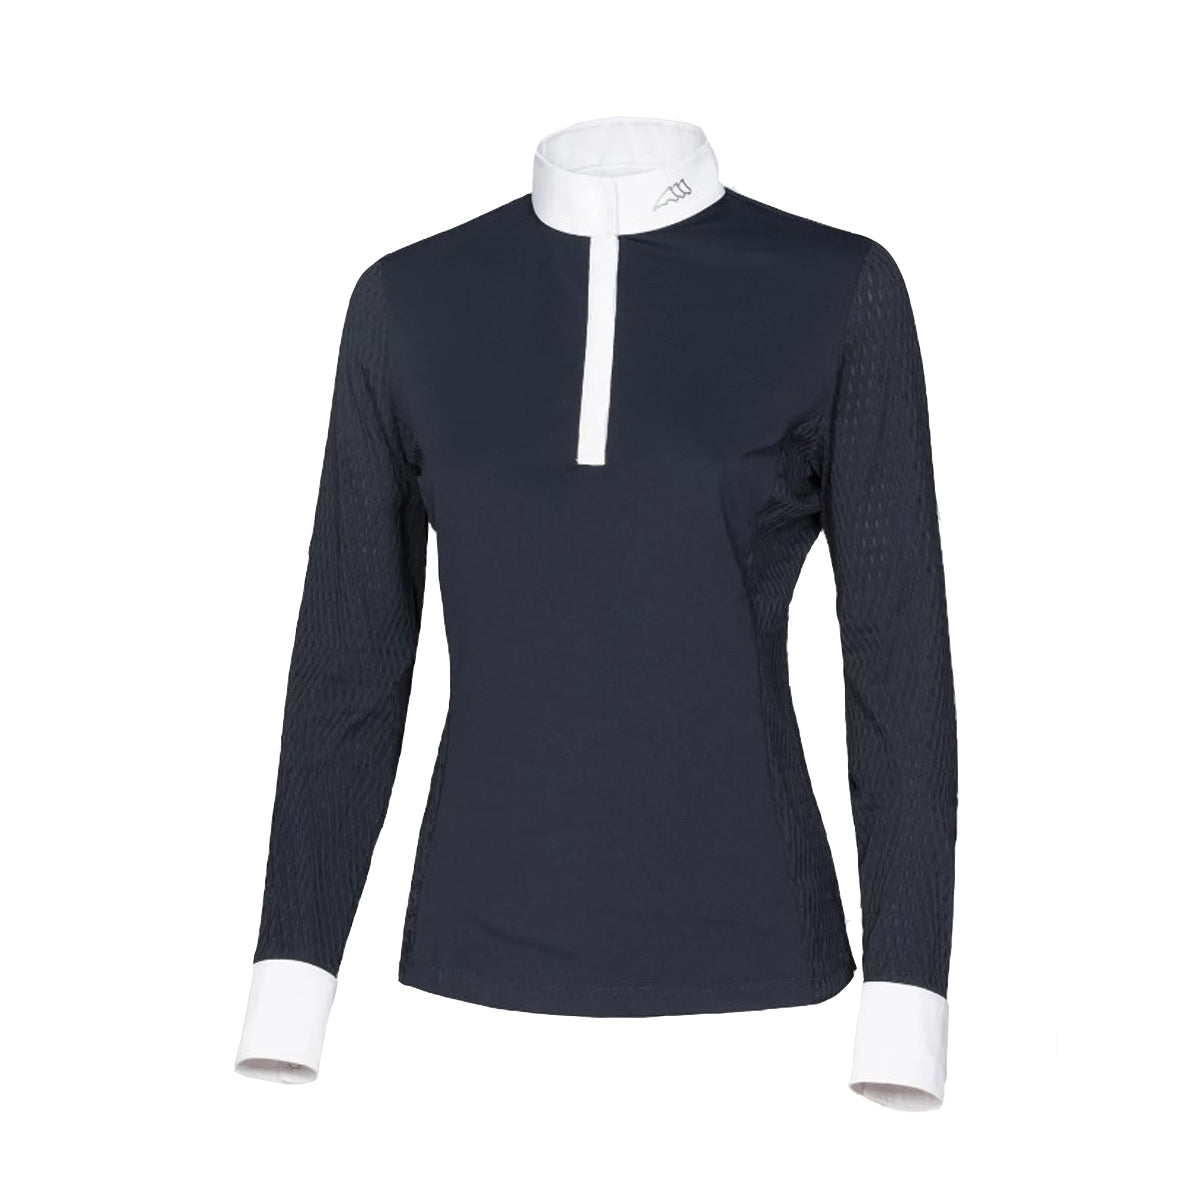 Equiline Women's Catic Long Sleeve Competition Shirt